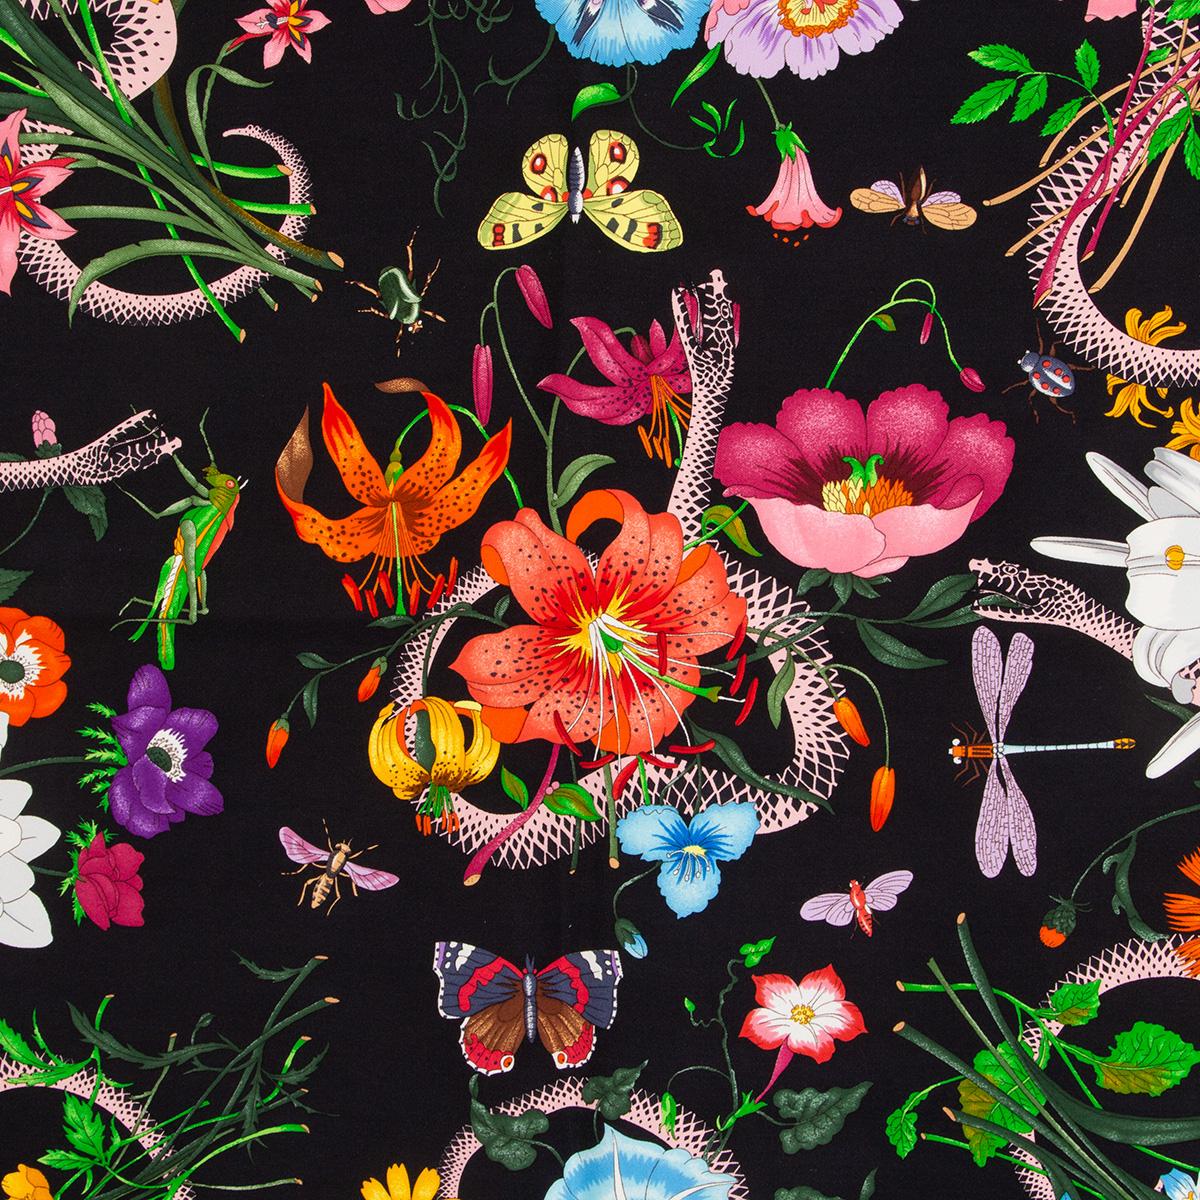 100% authentic  Gucci flora and snake printed scarf in pale rose and black silk (100%) featuring a stunning array of colorful flowers intertwined with coiling snakes-a symbol that has been established as one of Alessandro Michele's signature